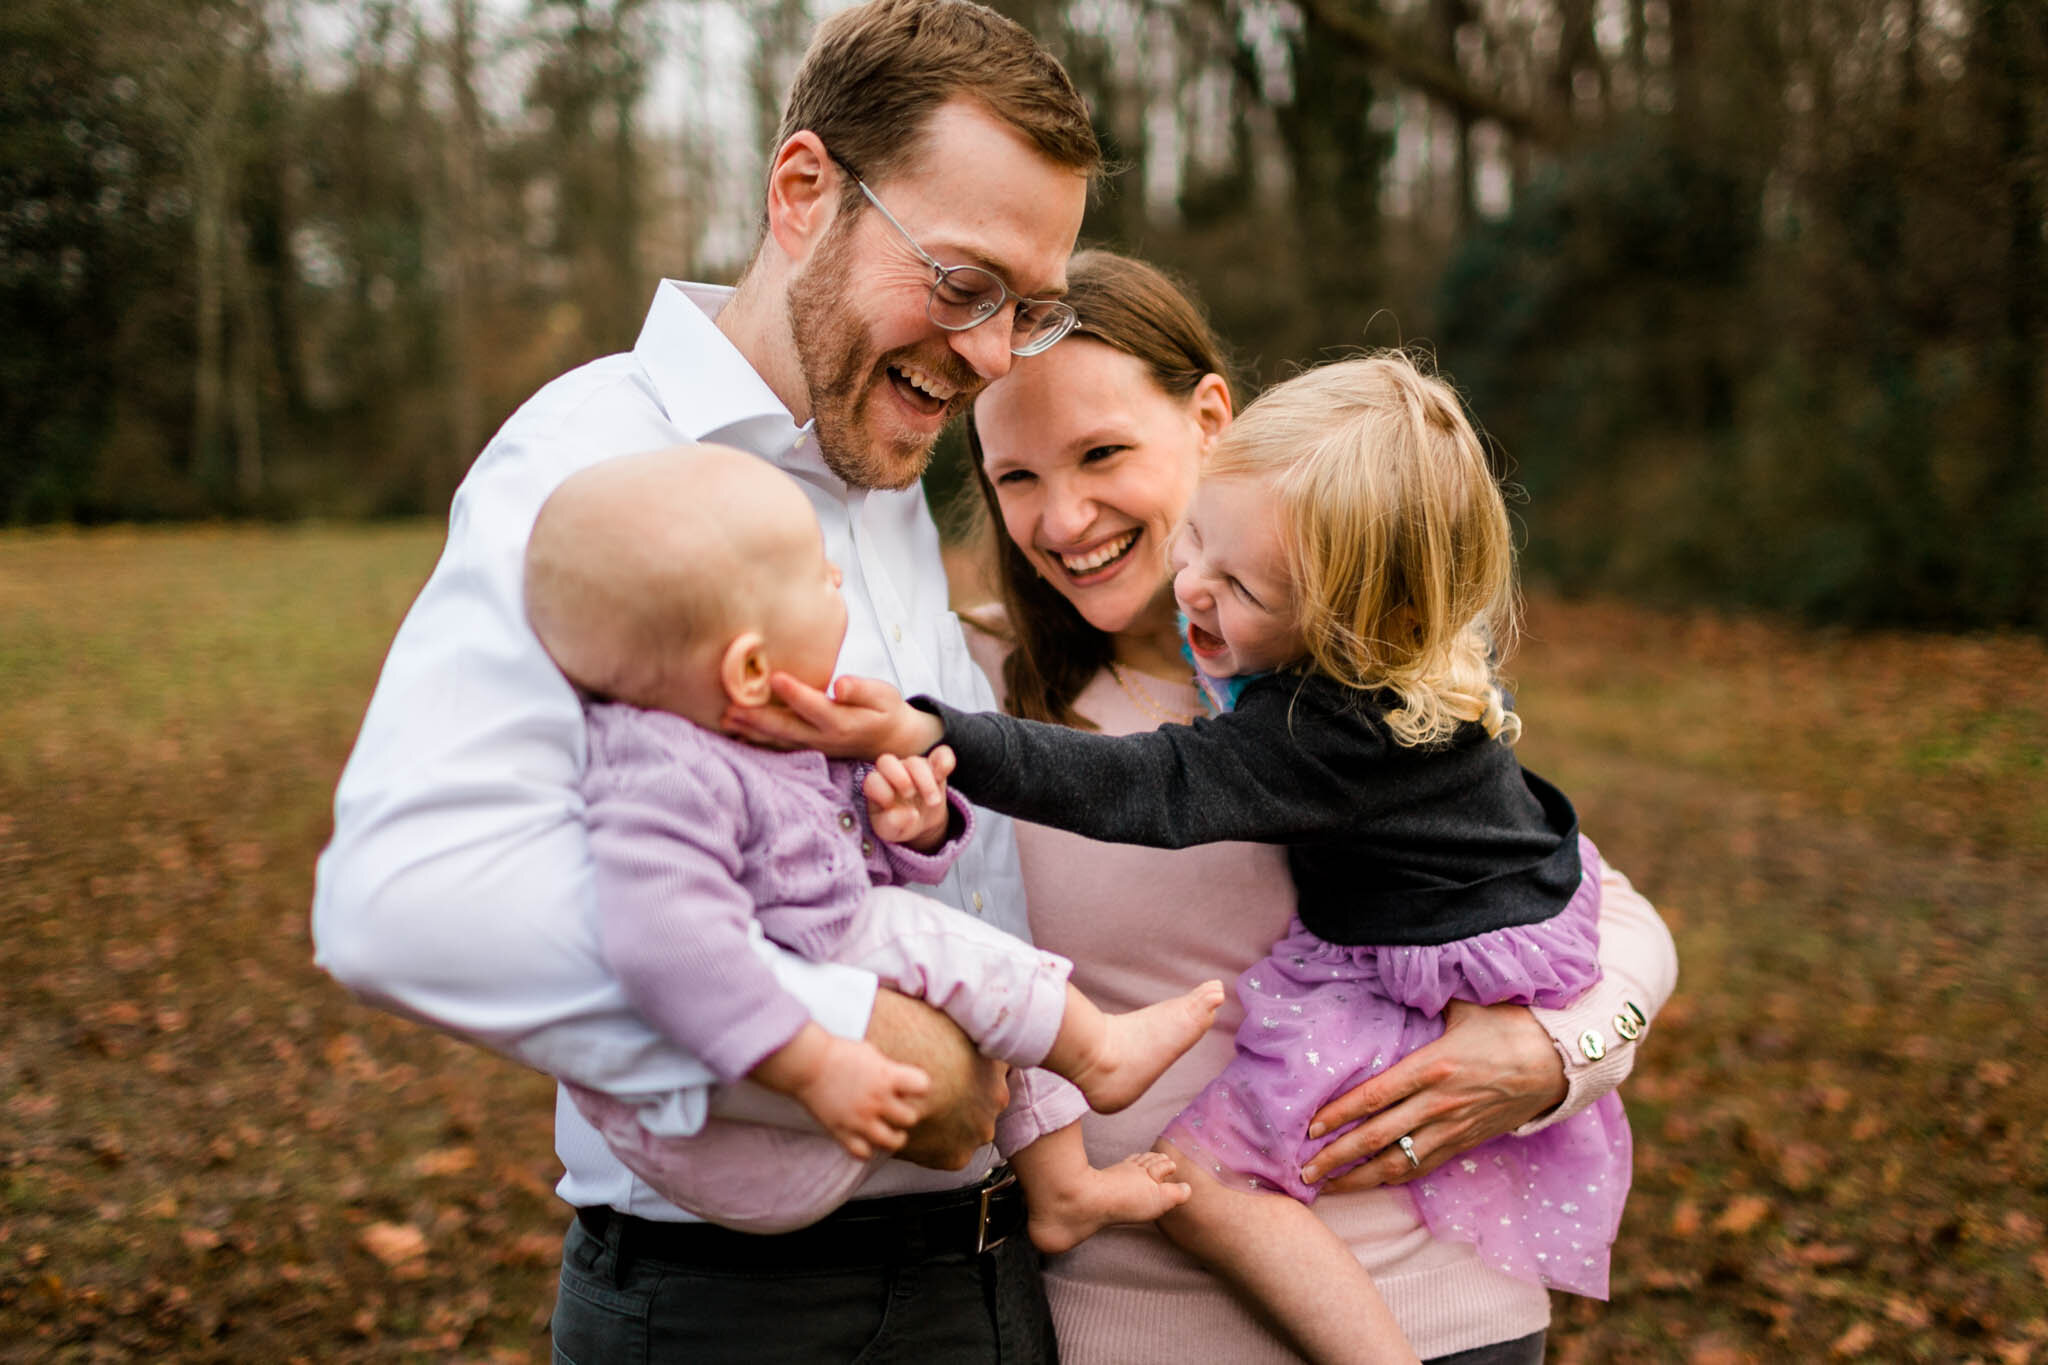 Durham Family Photographer | By G. Lin Photography | Candid family portrait outside in grassy area